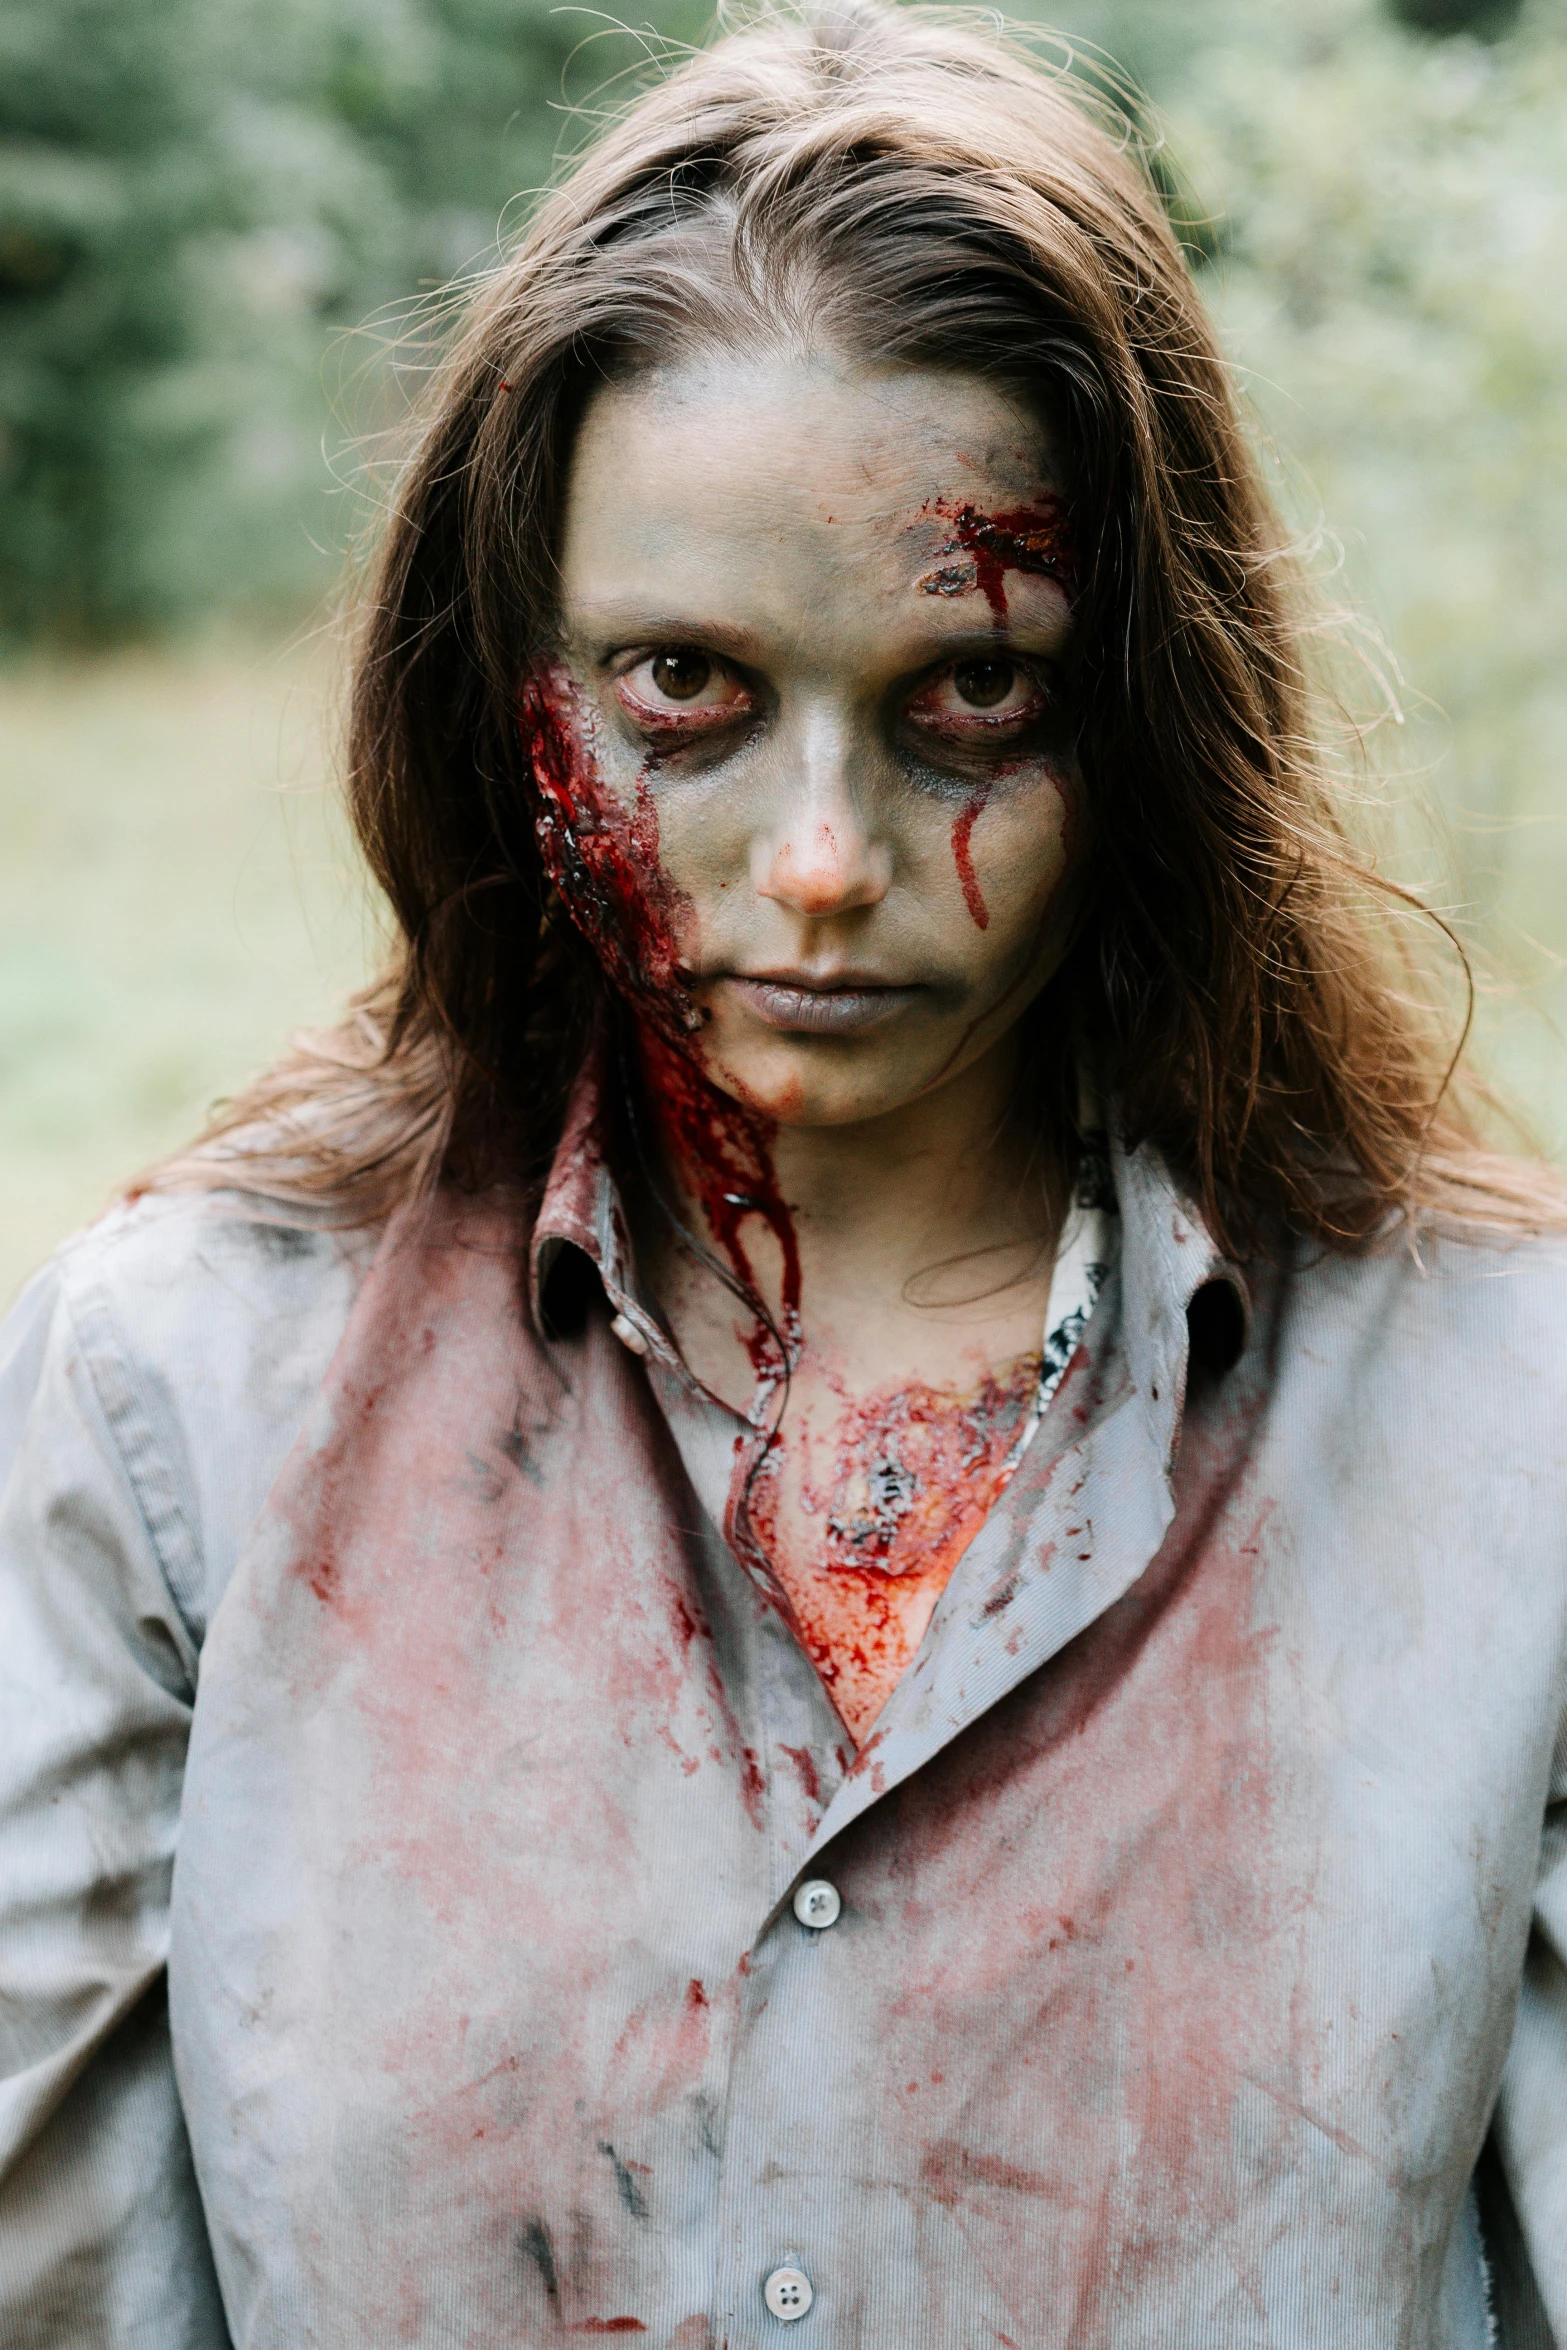 a woman with blood all over her face, inspired by Ada Hill Walker, pexels contest winner, dafne keen, undead ronald reagan zombie, summer glau, body and headshot